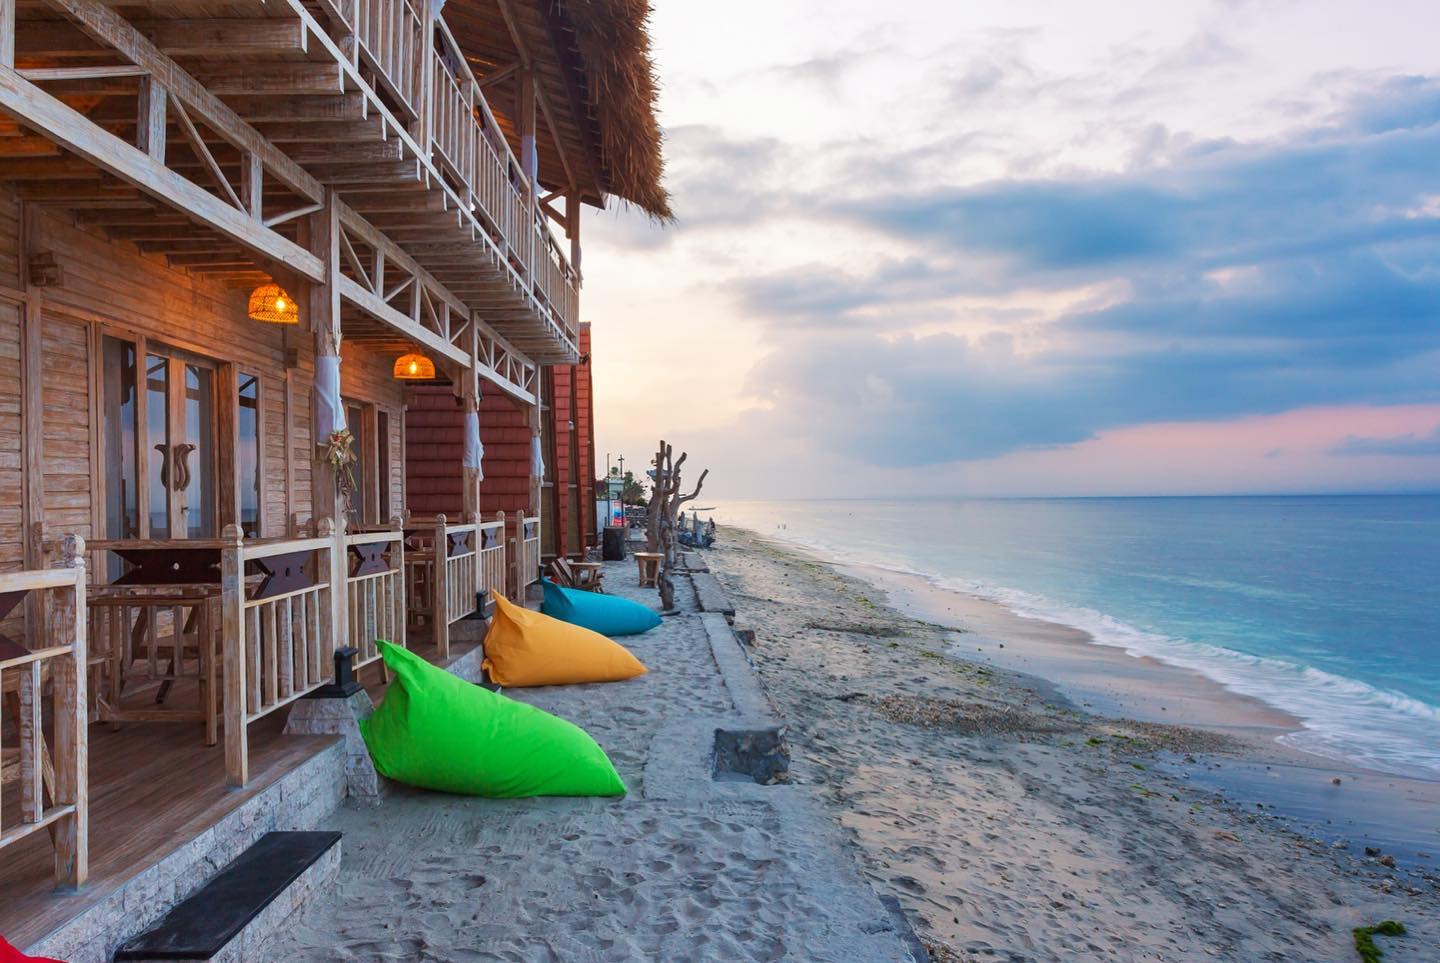 Affordable Bali beach resorts and villas - The Dewi Sunsun Suite